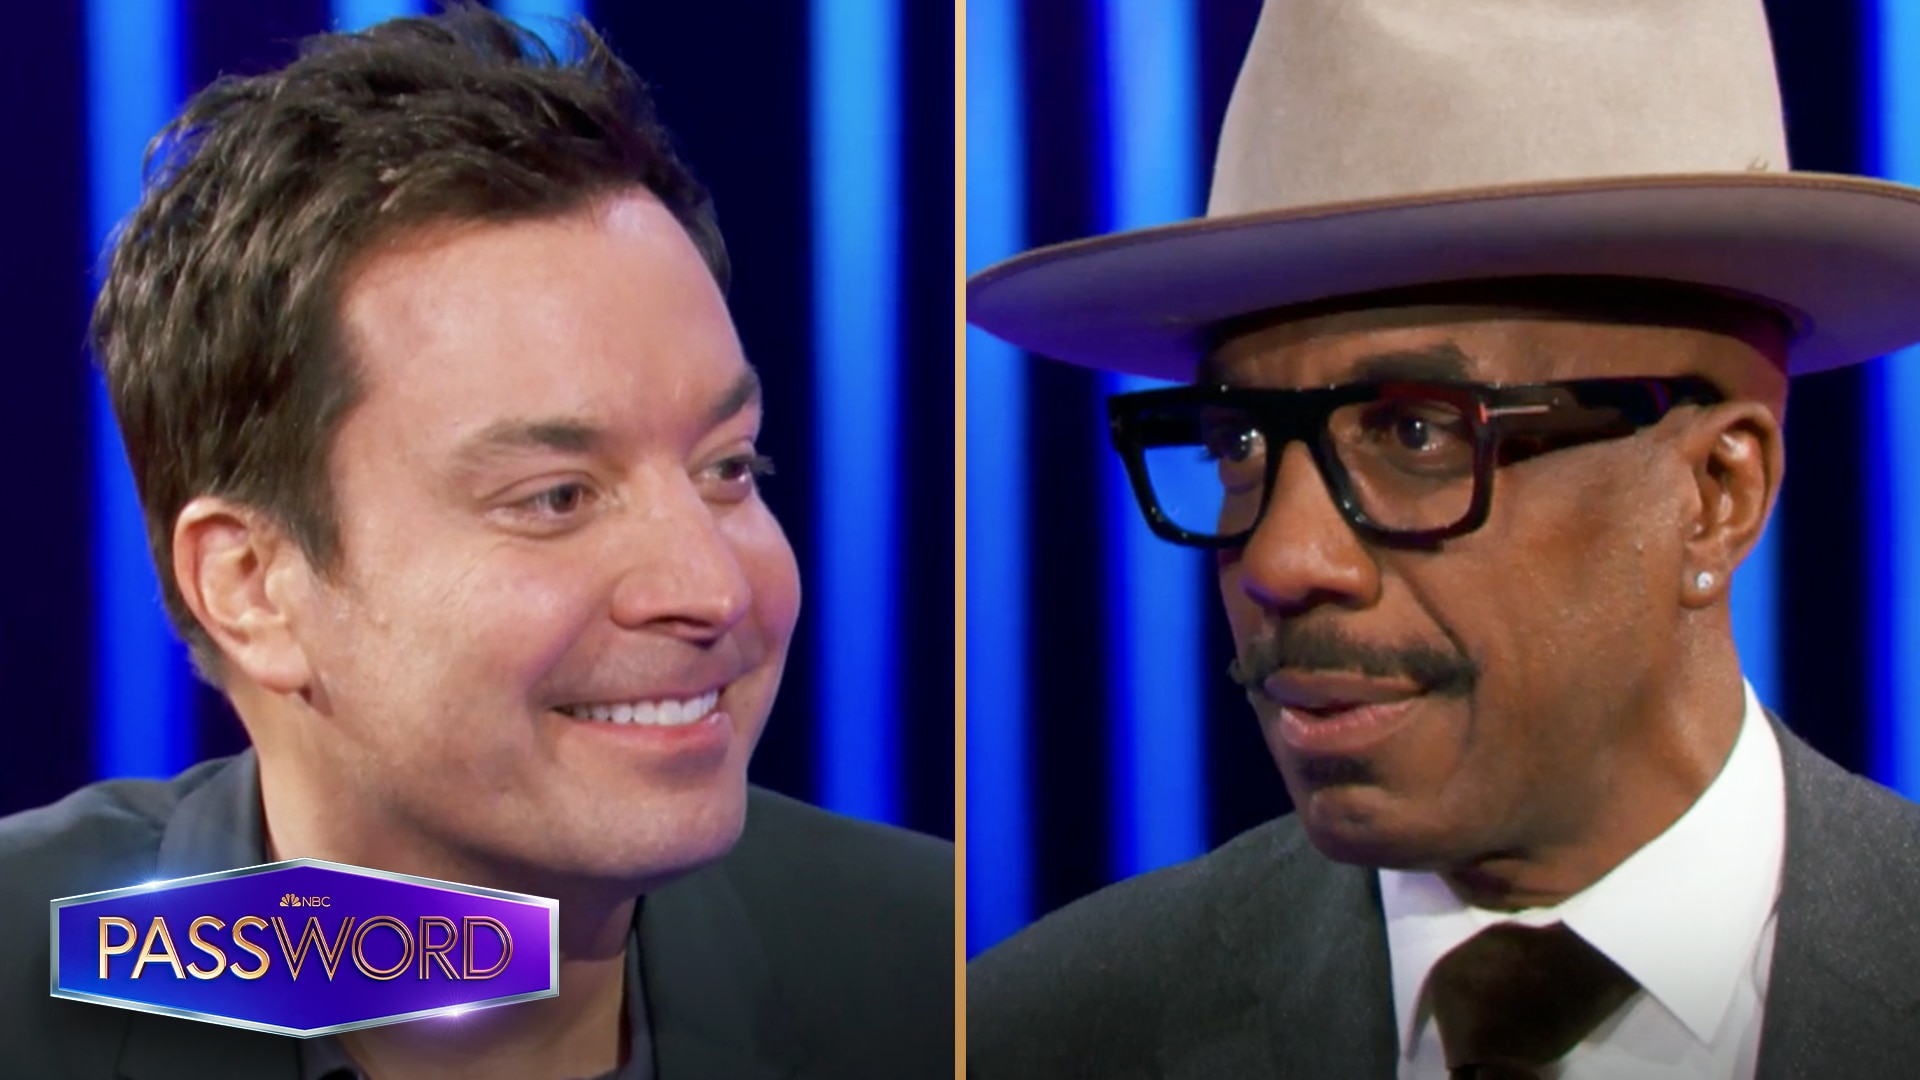 Watch Password Highlight JB Smoove and Jimmy Fallon Go HeadtoHead in